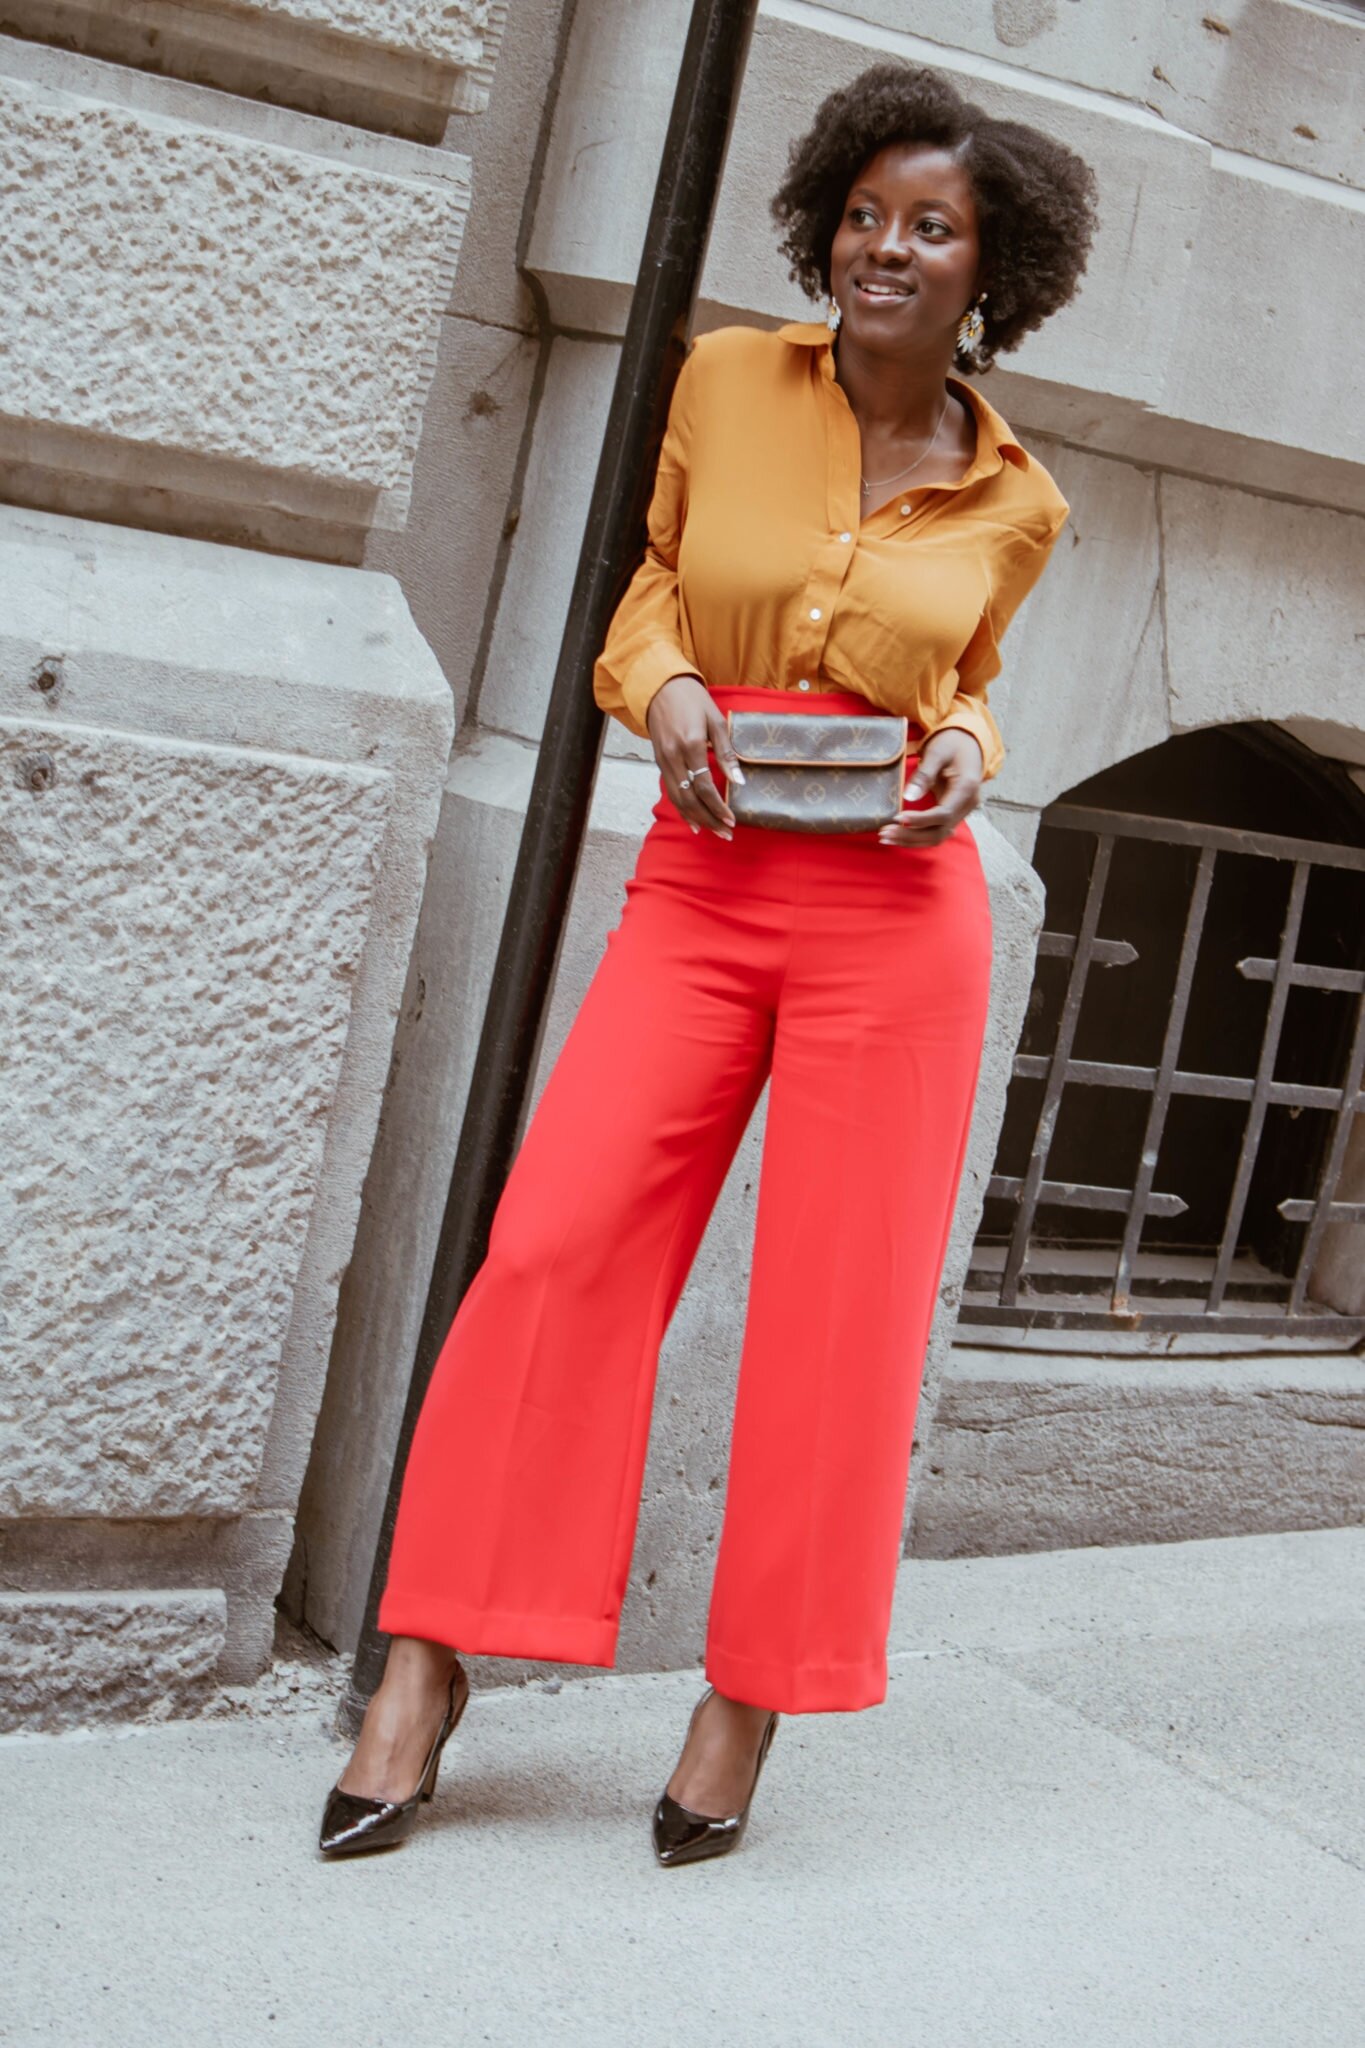 More Than You Can Imagine - Street Style: LOUIS VUITTON Florentine